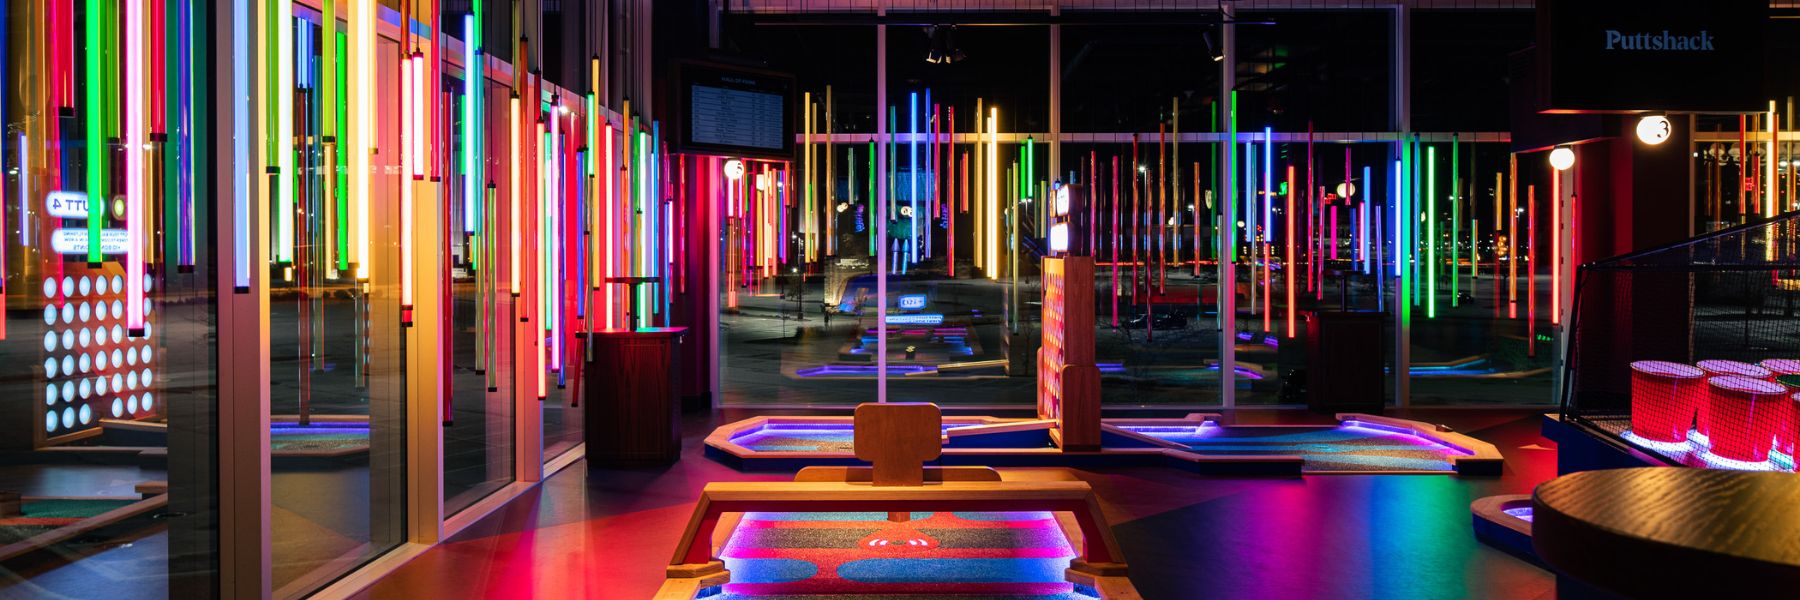 Puttshack offers Instagrammable, tech-infused miniature golf courses at City Foundry.